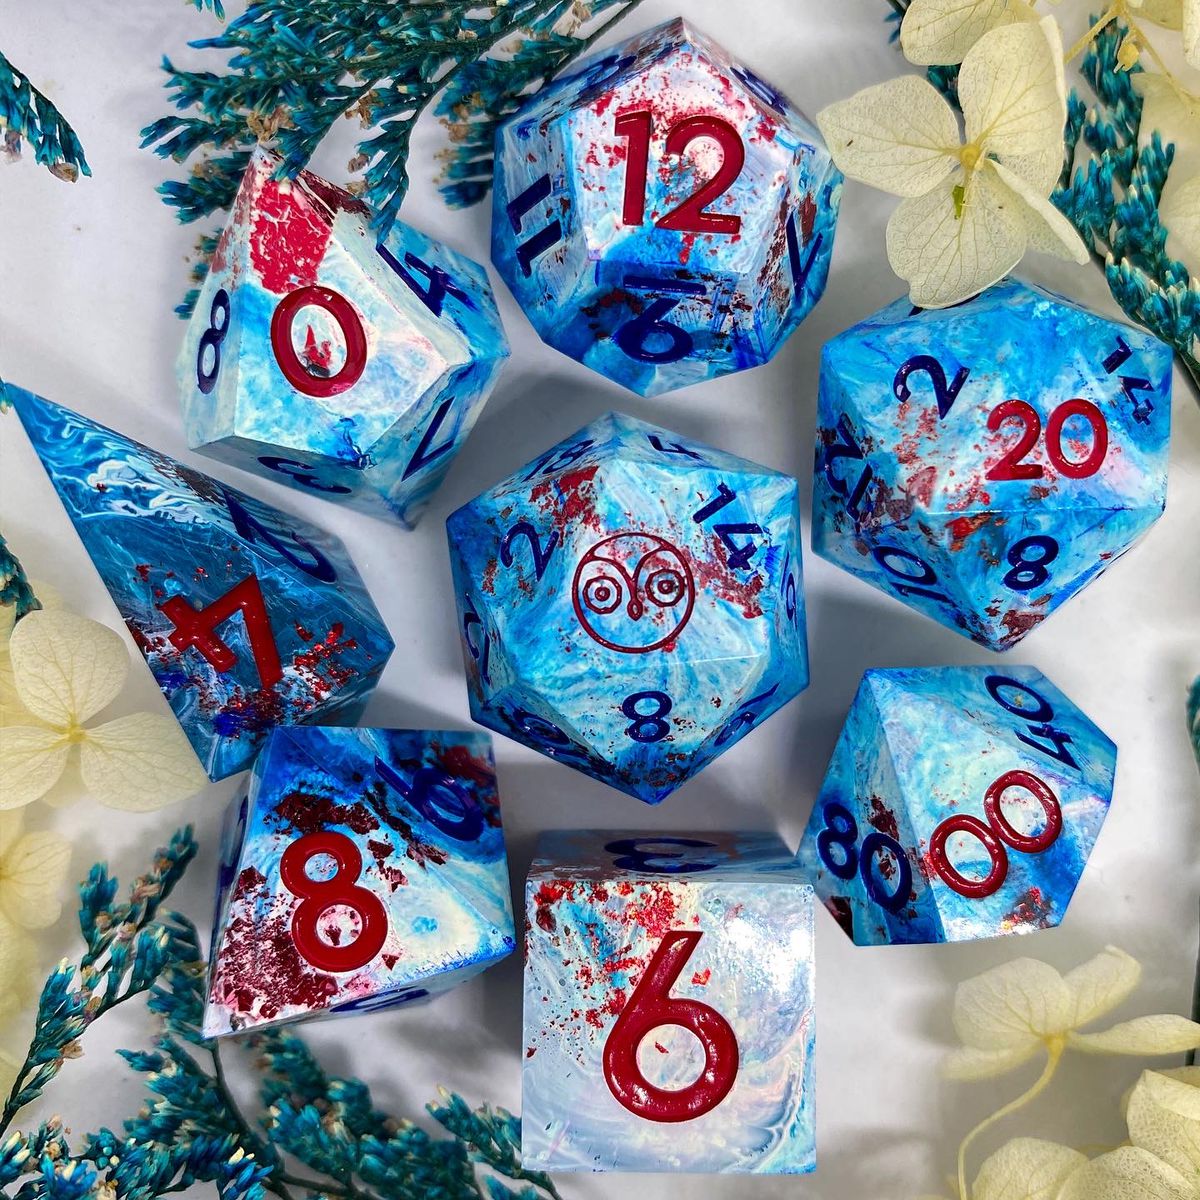 Blue and white dice with red, inked red, an owl logo on the 20-side.